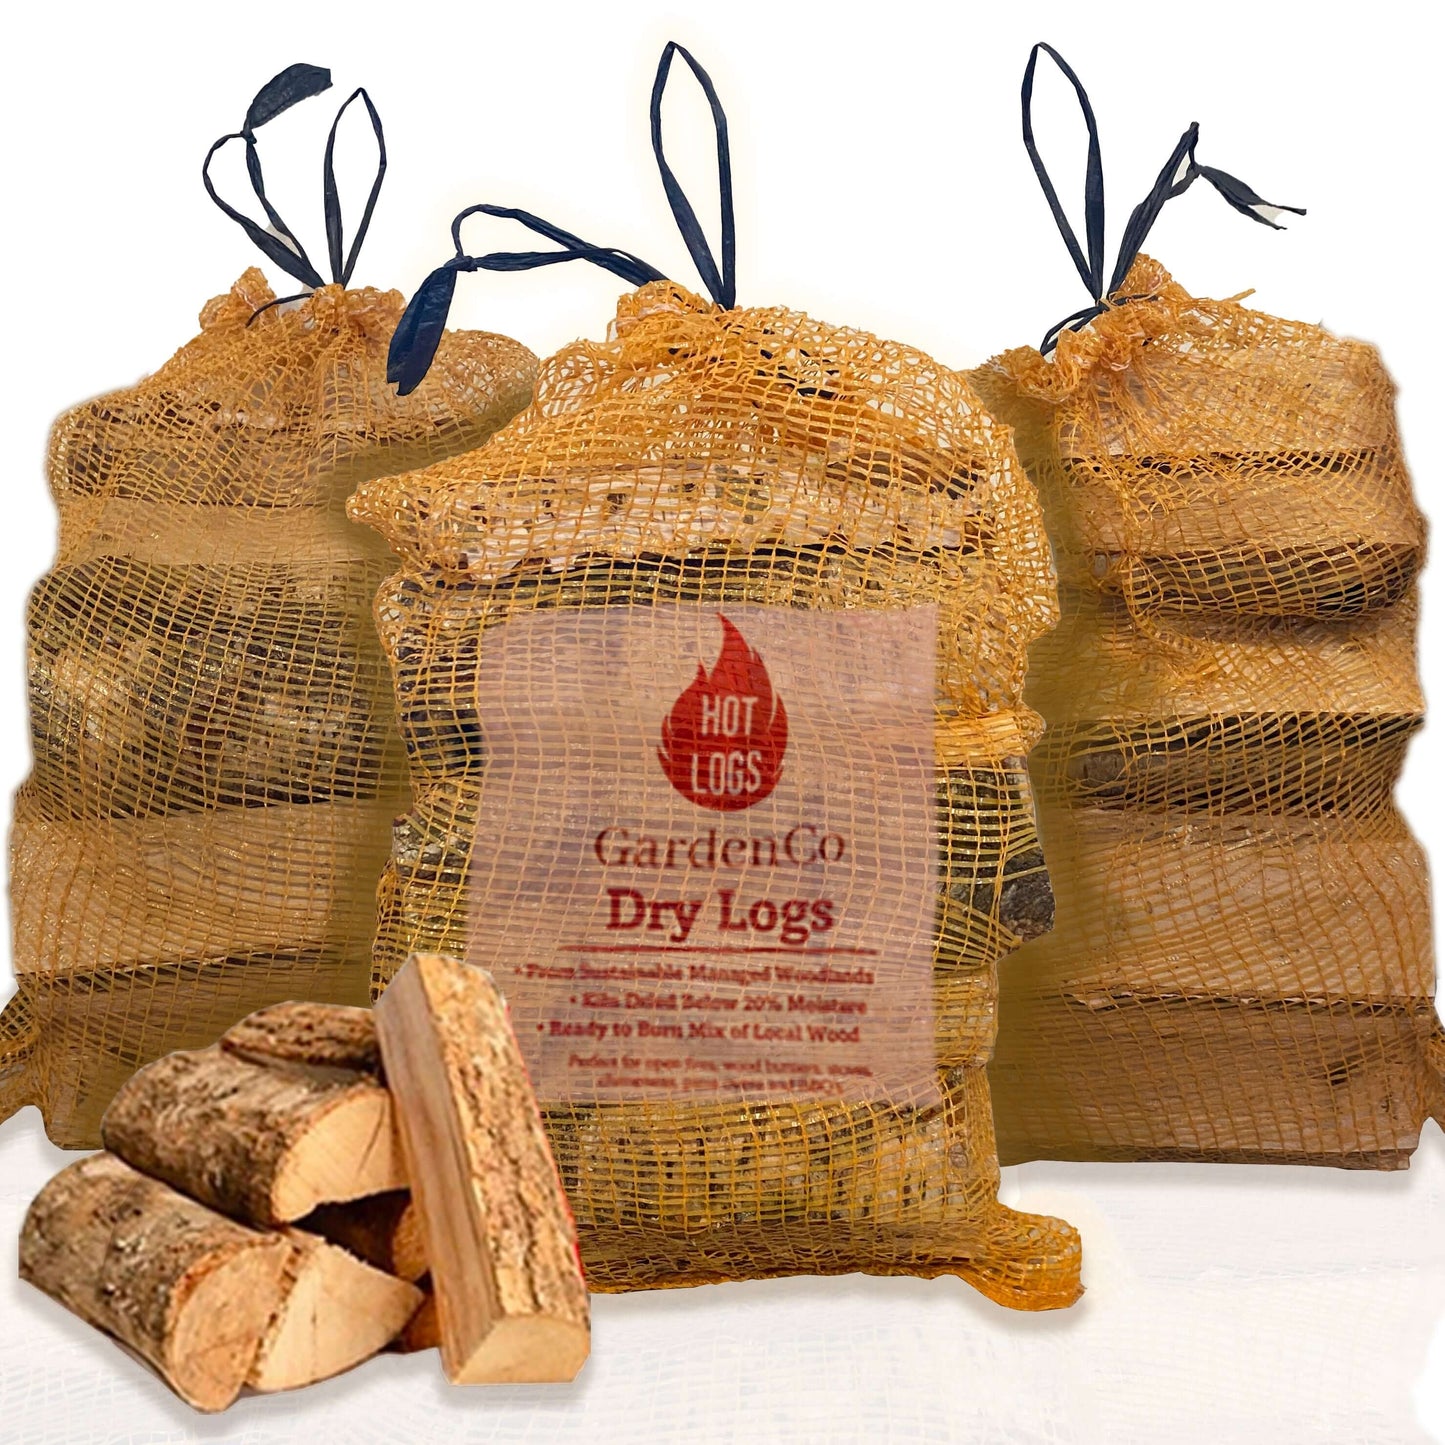 3x Large Bags Kiln Dried Fire Logs, (approximately 27kg), For Wood Burners, Stoves & Fireplaces, Hot Burning Sustainably Sourced Logs.